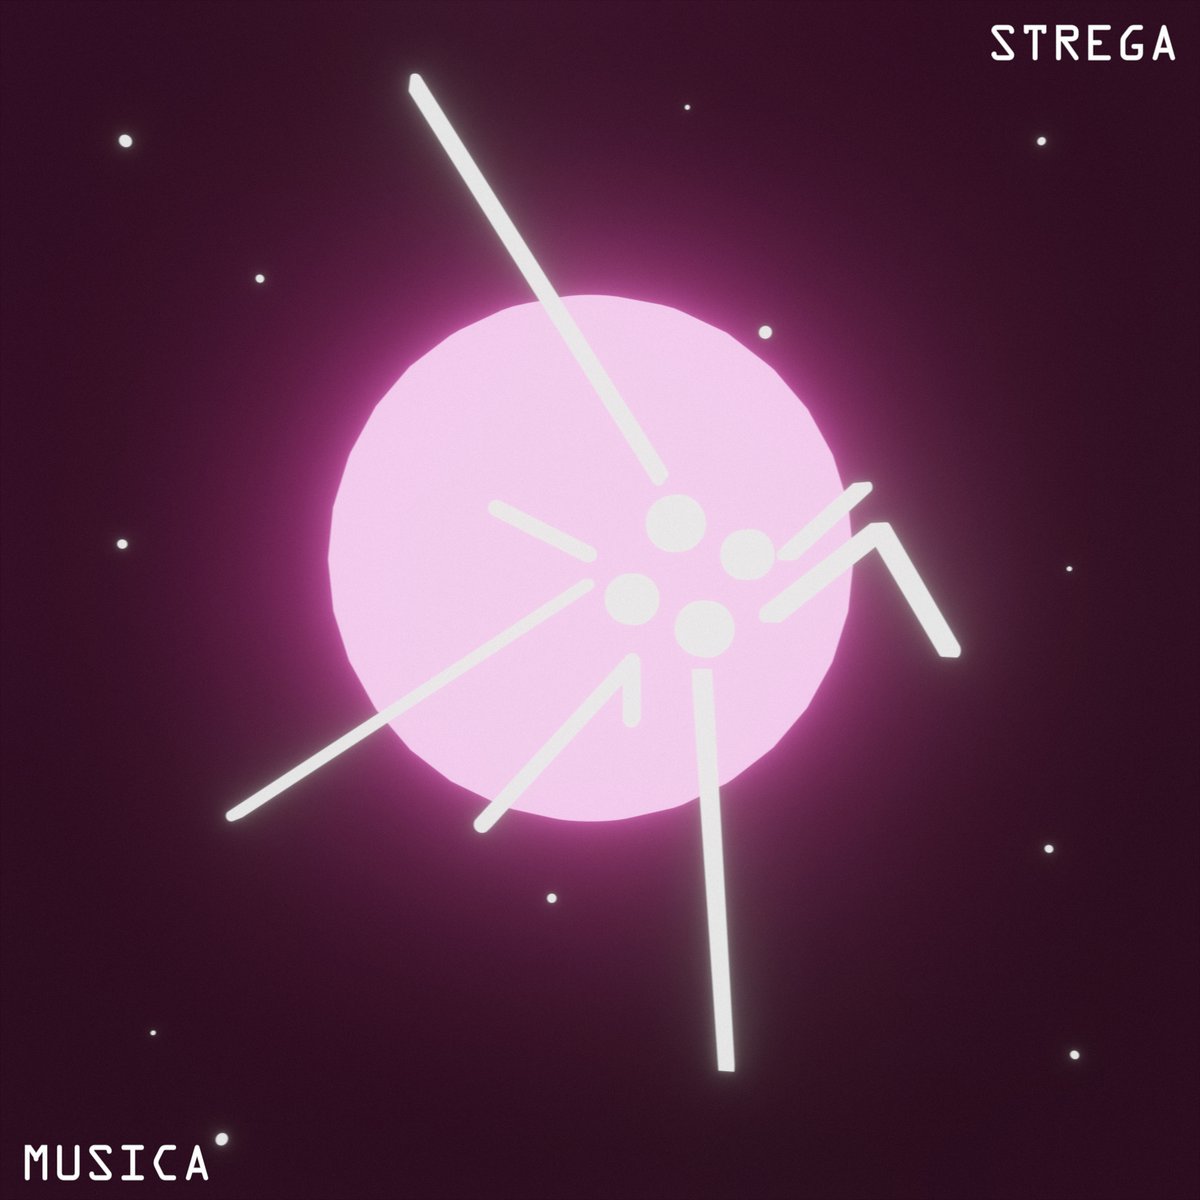 Looking to add Strega Musica to your Bandcamp Collection?  Visit our site for a free download code:

makenoisemusic.com/strega-comp

Curated by @blindoldfreak with exclusive tracks by @abulmogard, @juliannabarwick, @PatchBae, @rolando_vision, @ethermachines, @lichensarealive & more!